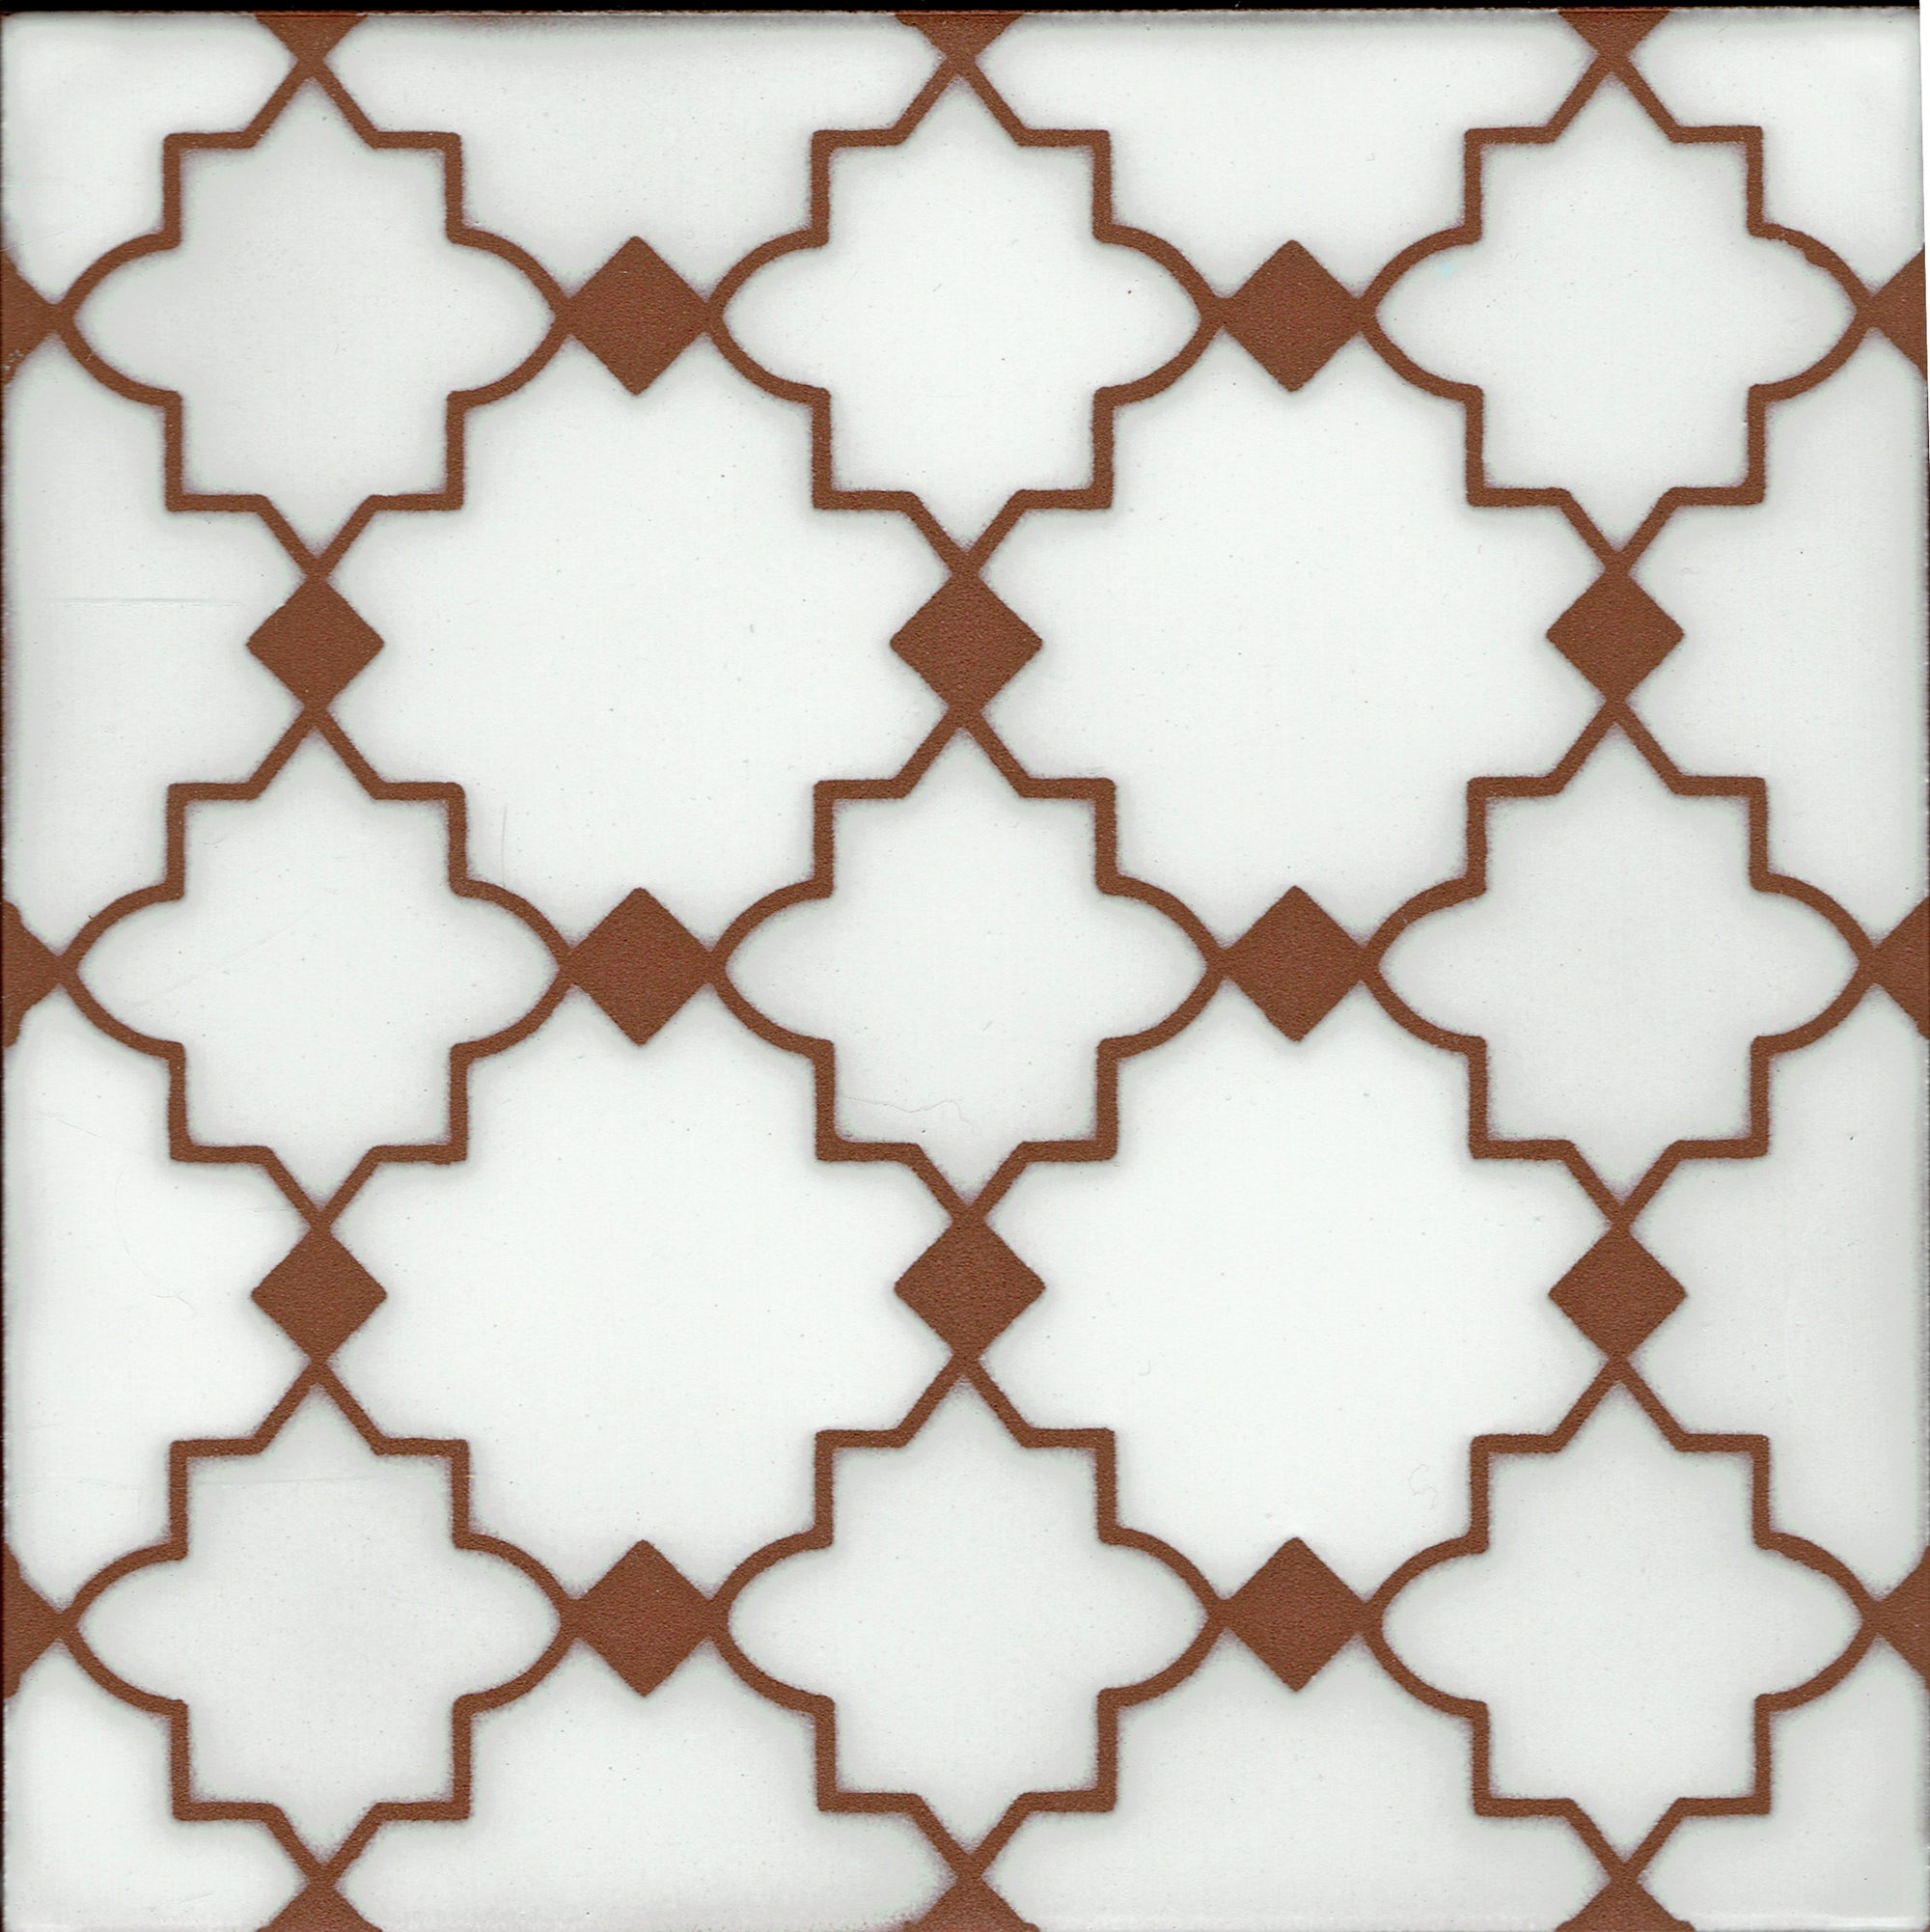 Berber 2 in White (8"x8") - Handpainted Ceramic Tile Second for Kitchen, Bathroom, Wall & Table Decor